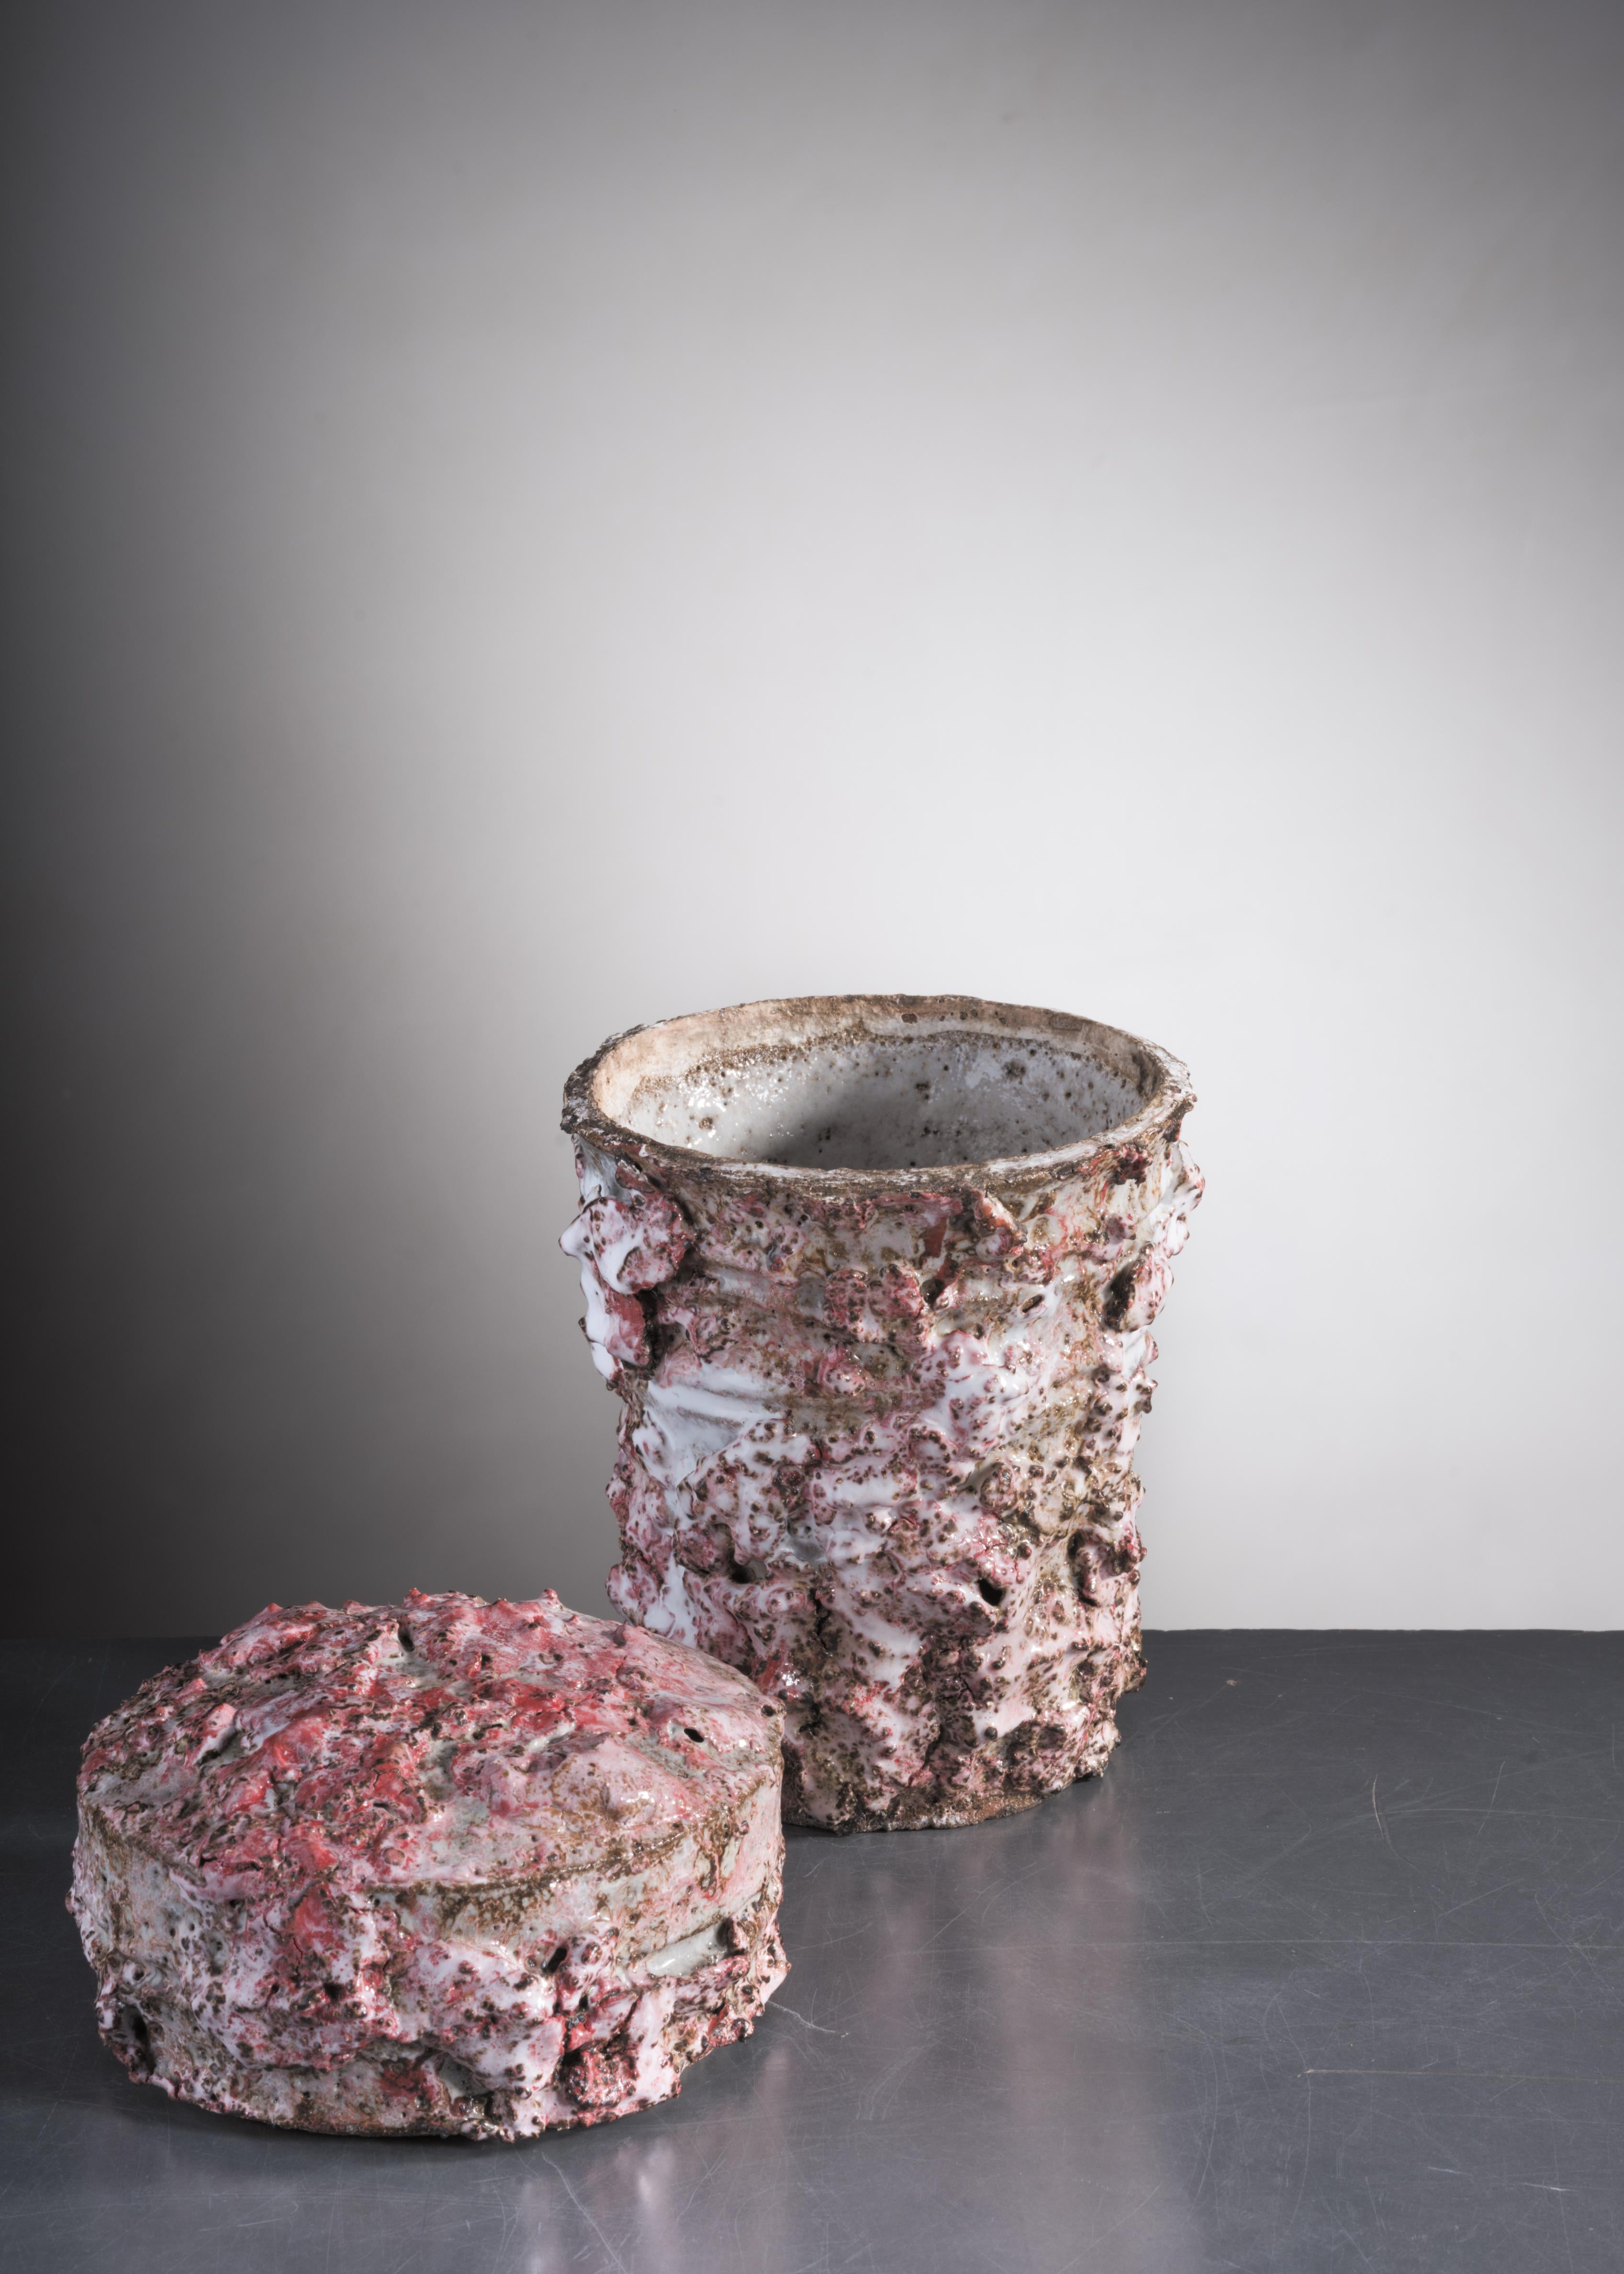 A jar with lid by Danish ceramist Tina Langhoff (1971). It is made of stoneware and porcelain with a thick, textured pink and white glazing.